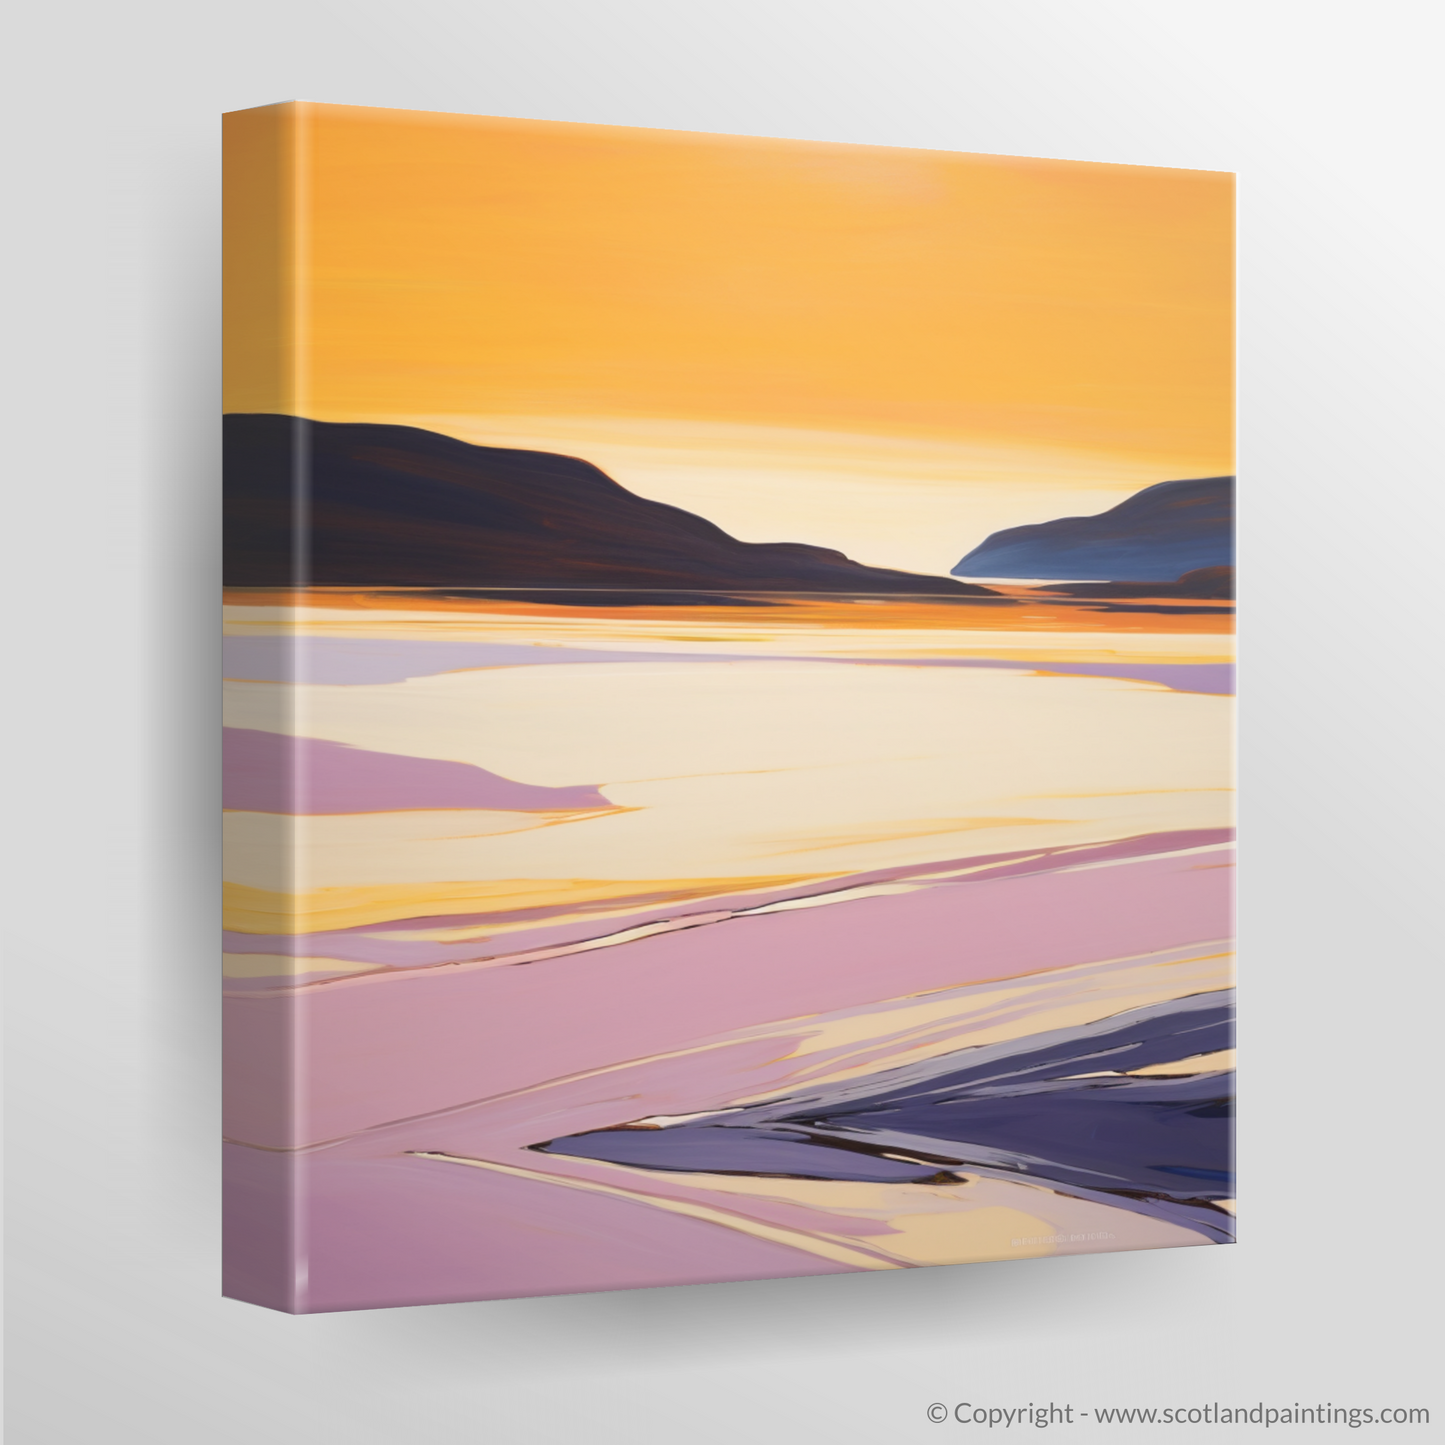 Golden Serenity of Balnakeil Bay: A Color Field Masterpiece